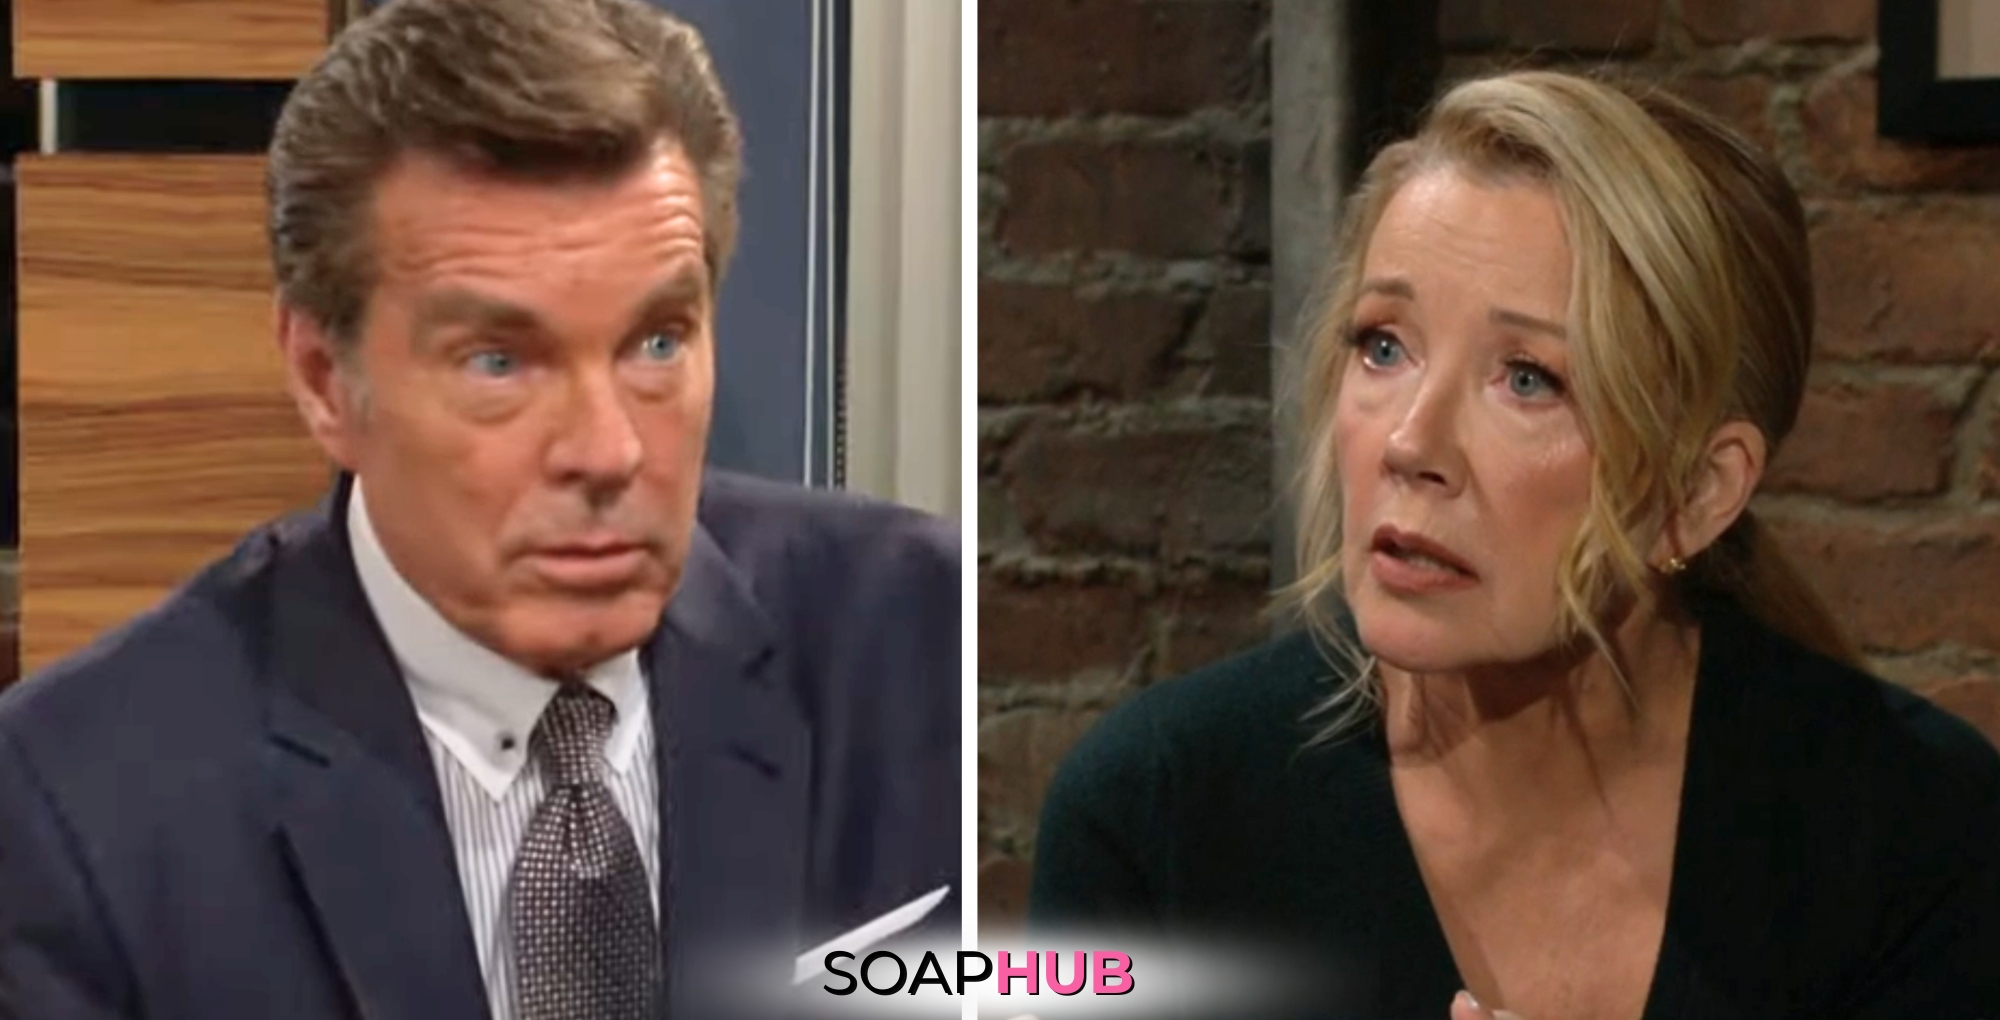 Y&R Spoilers: Nikki Calls for Help – From Jack